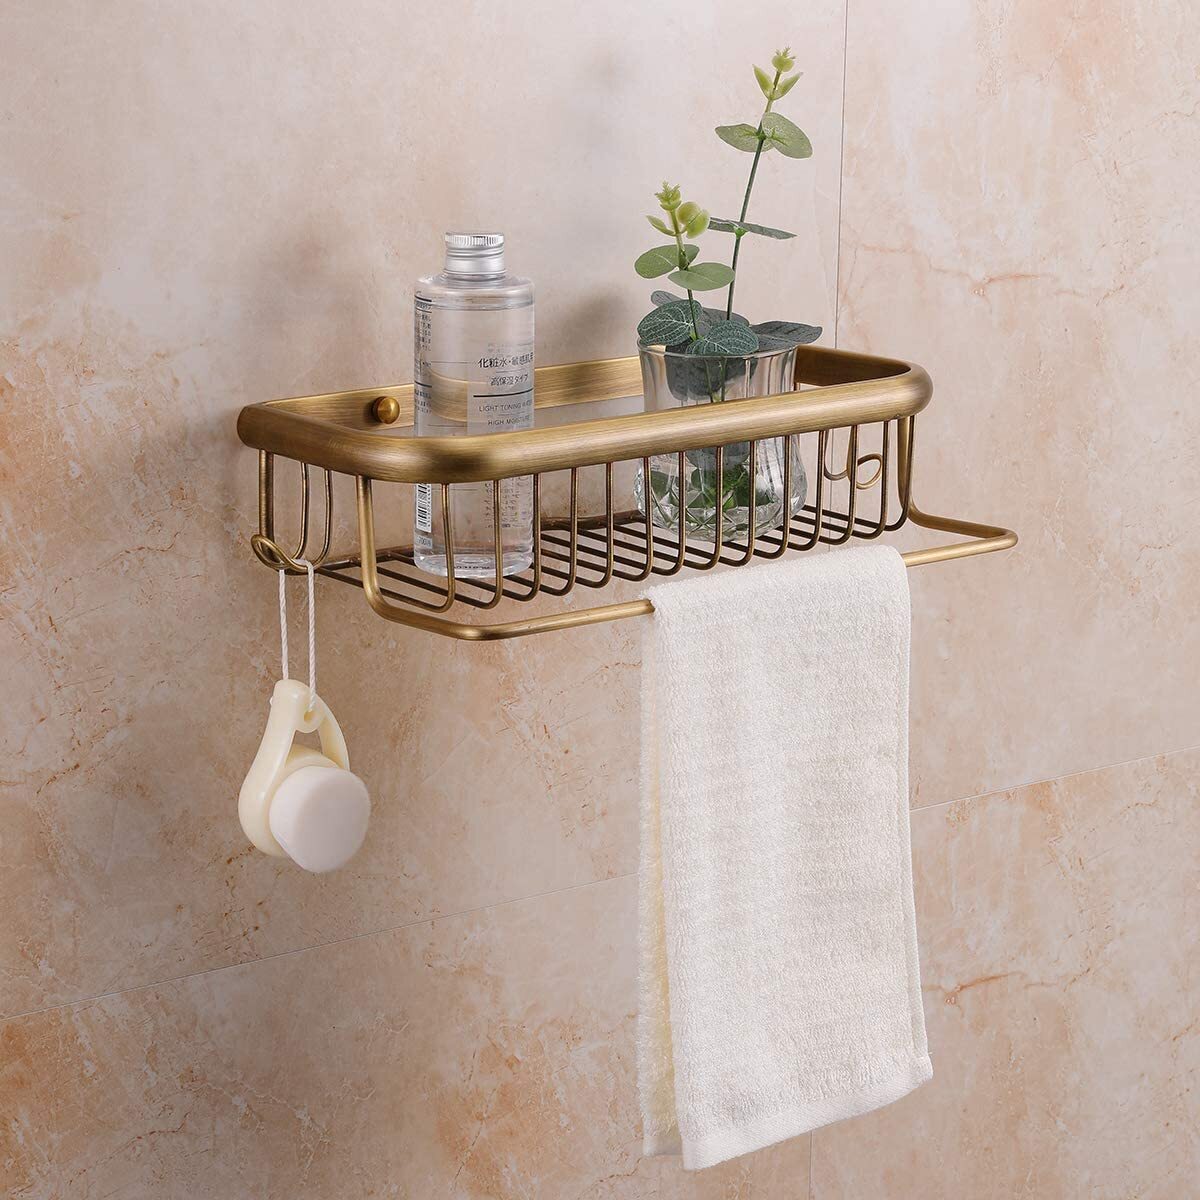 Shower Caddy with Bar